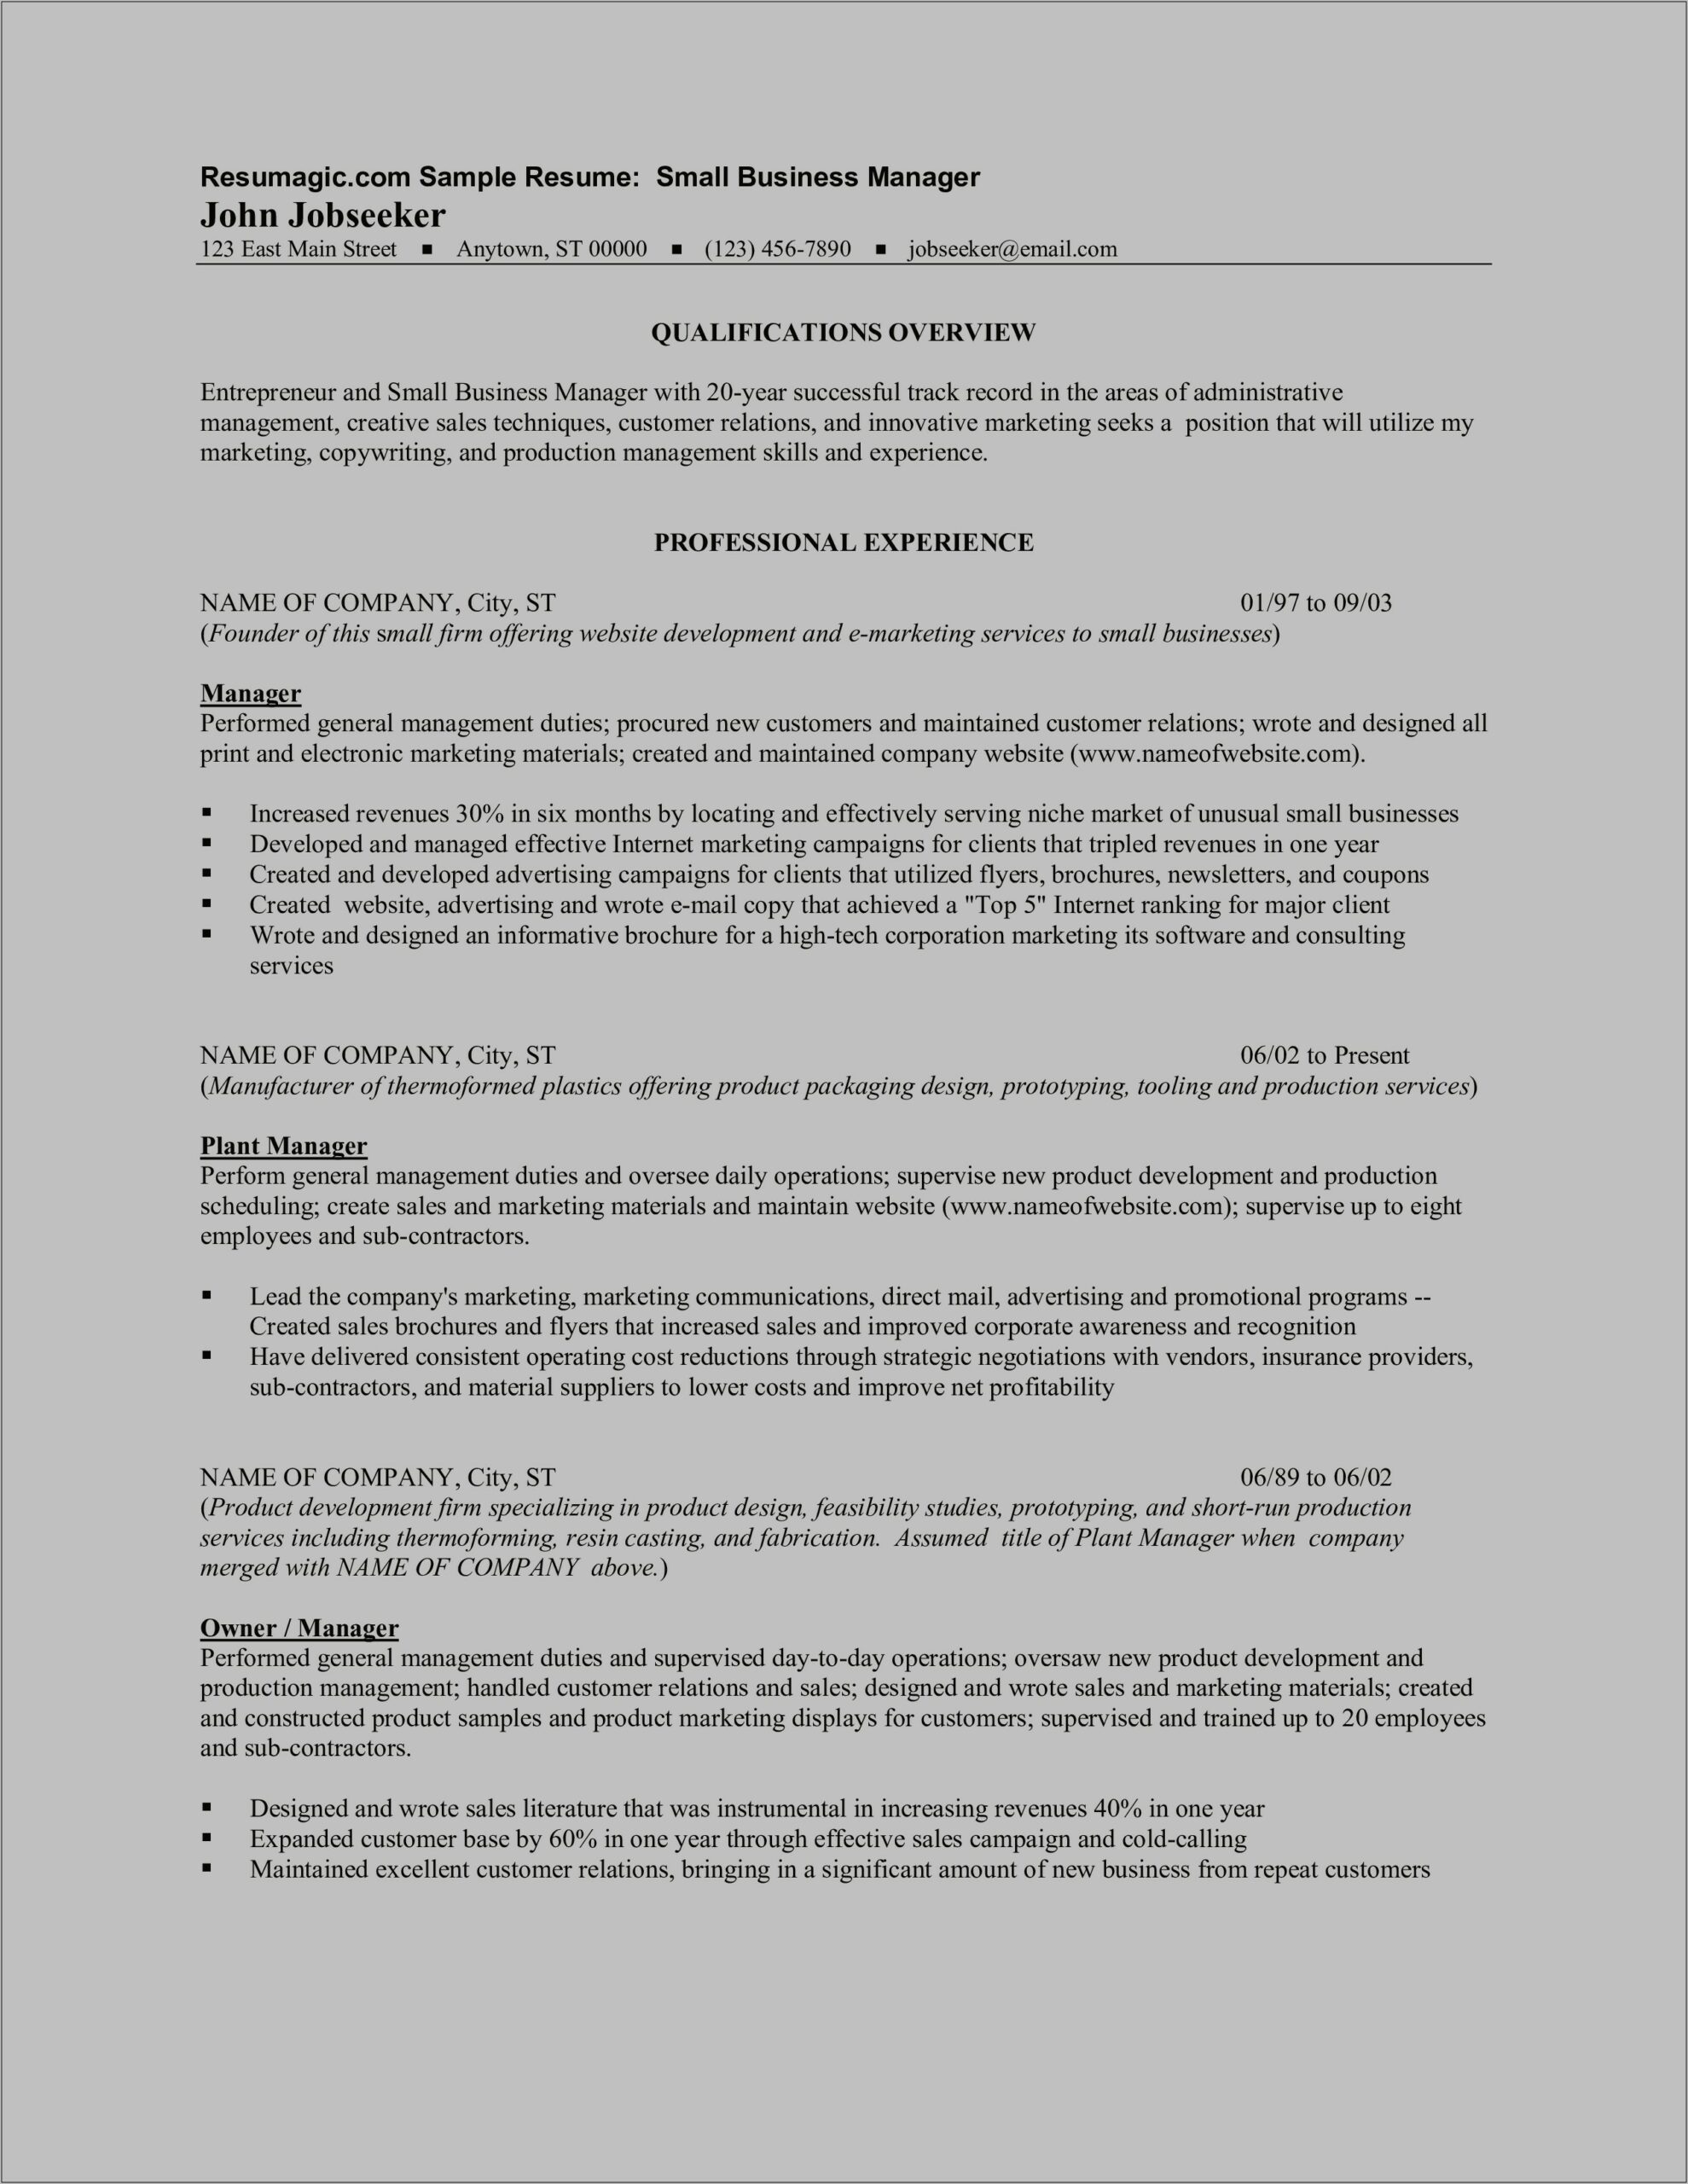 Example Resume Websites For Communications